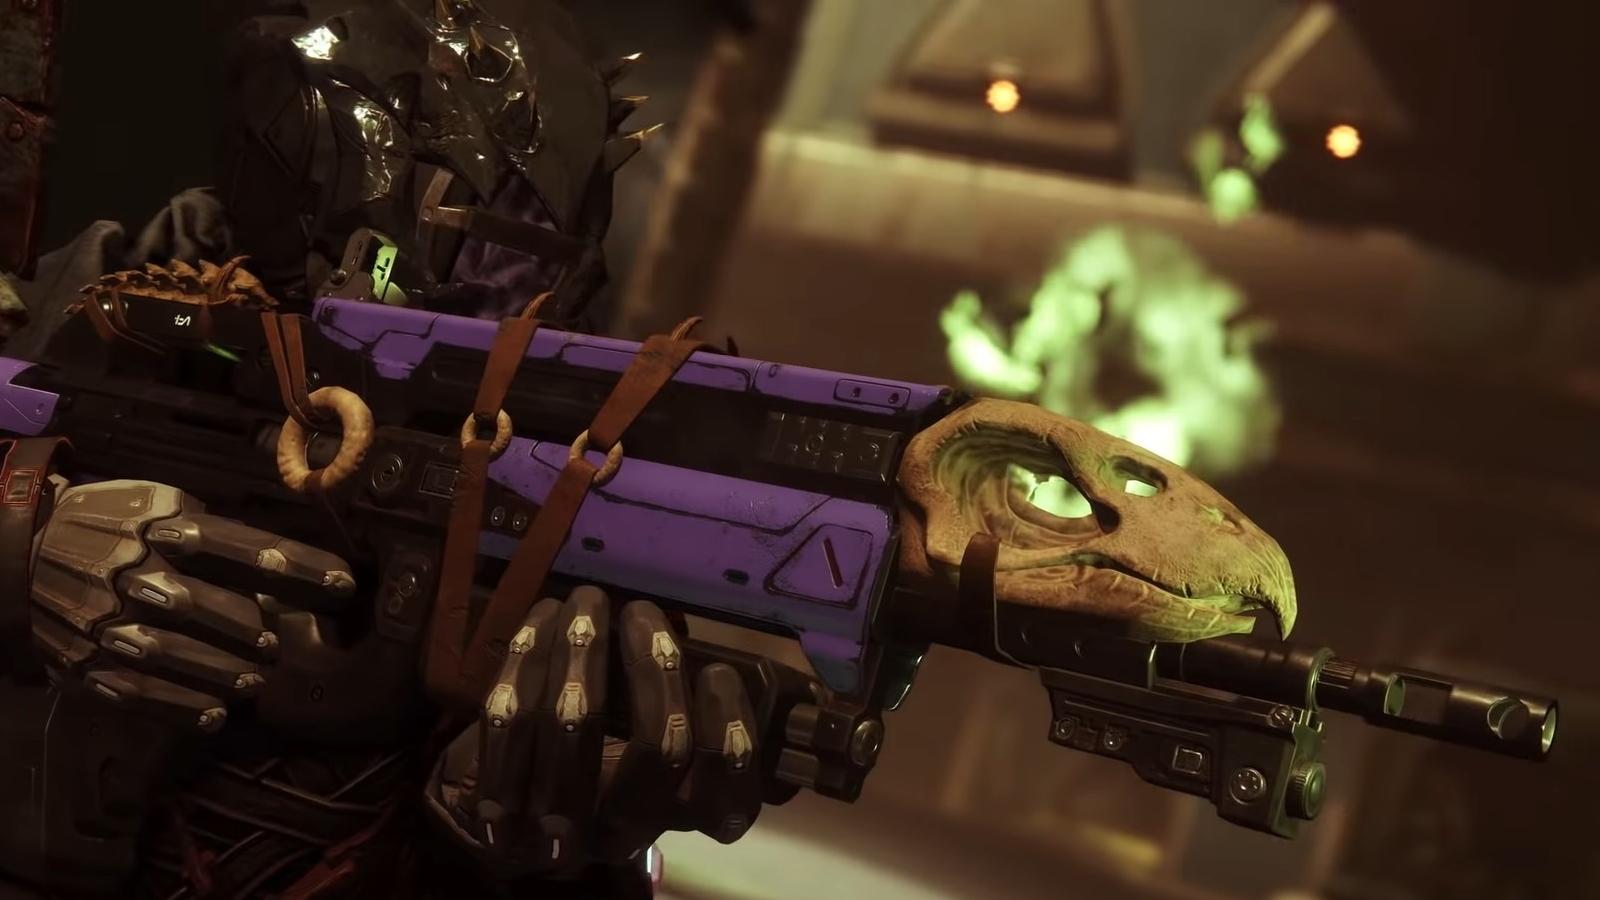 Guardian aiming in with Bad Juju Exotic Pulse Rifle in Destiny 2.